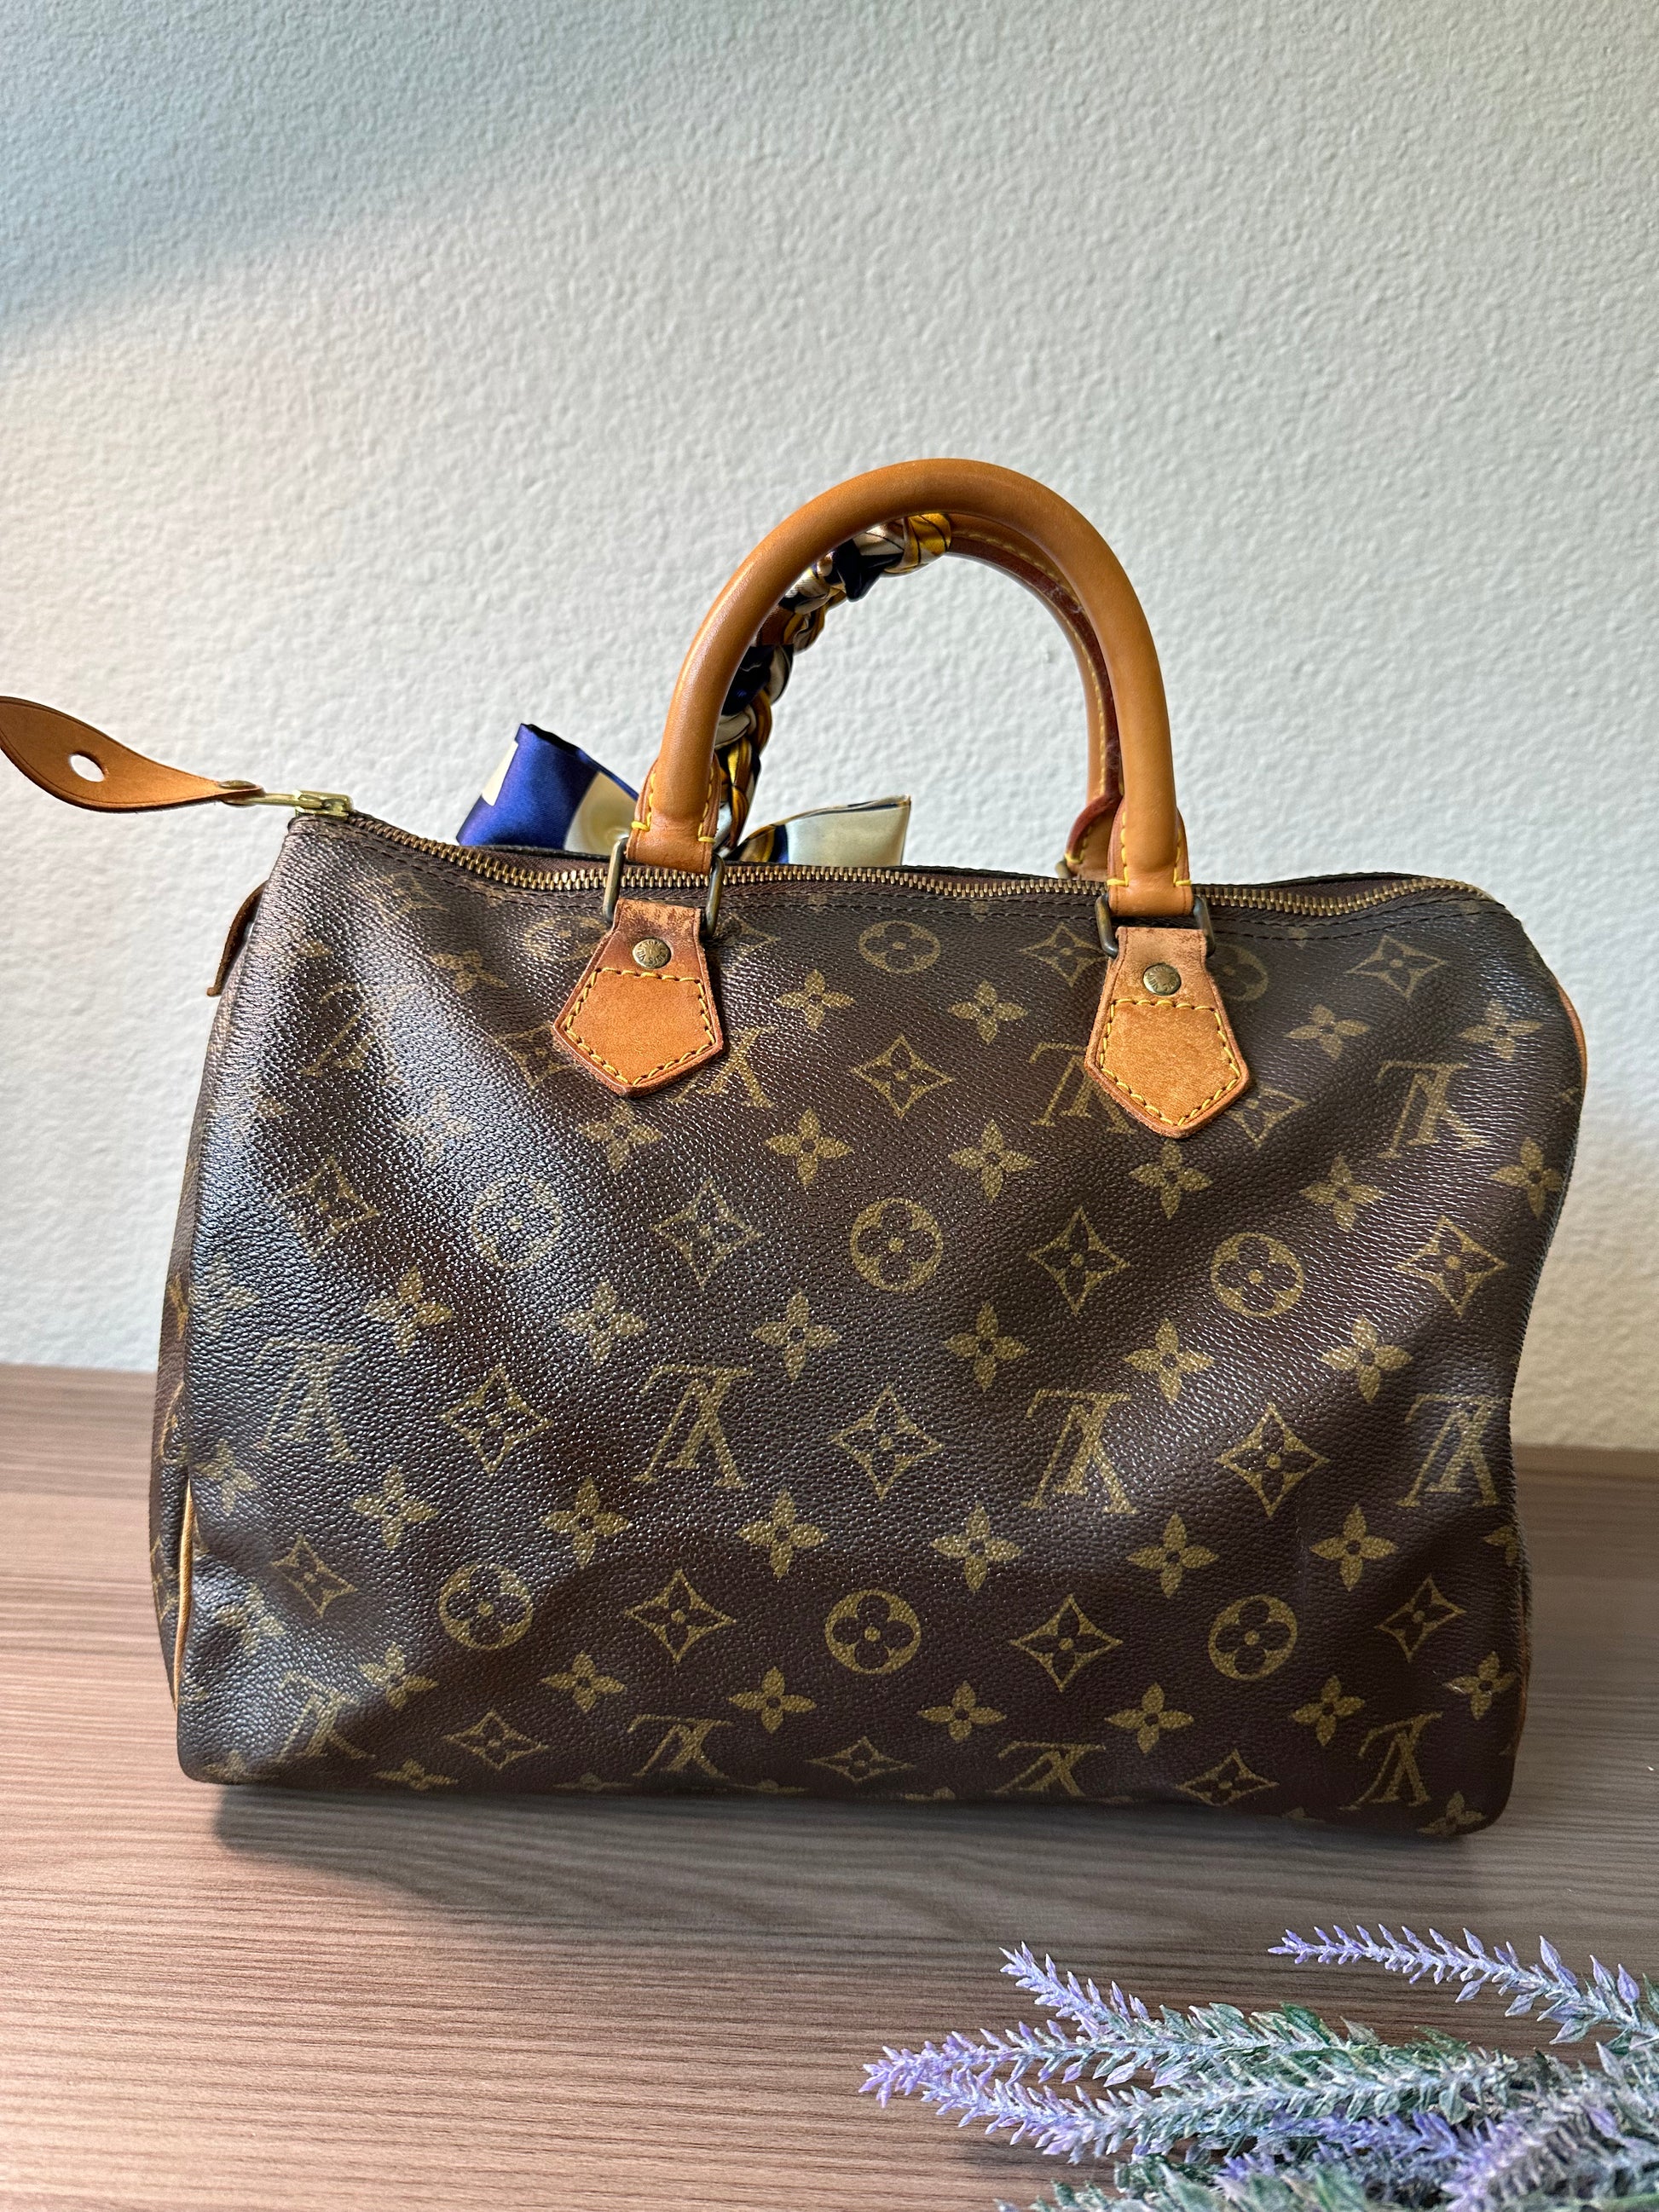 Authentic Louis Vuitton Speedy 30 Pre Owned